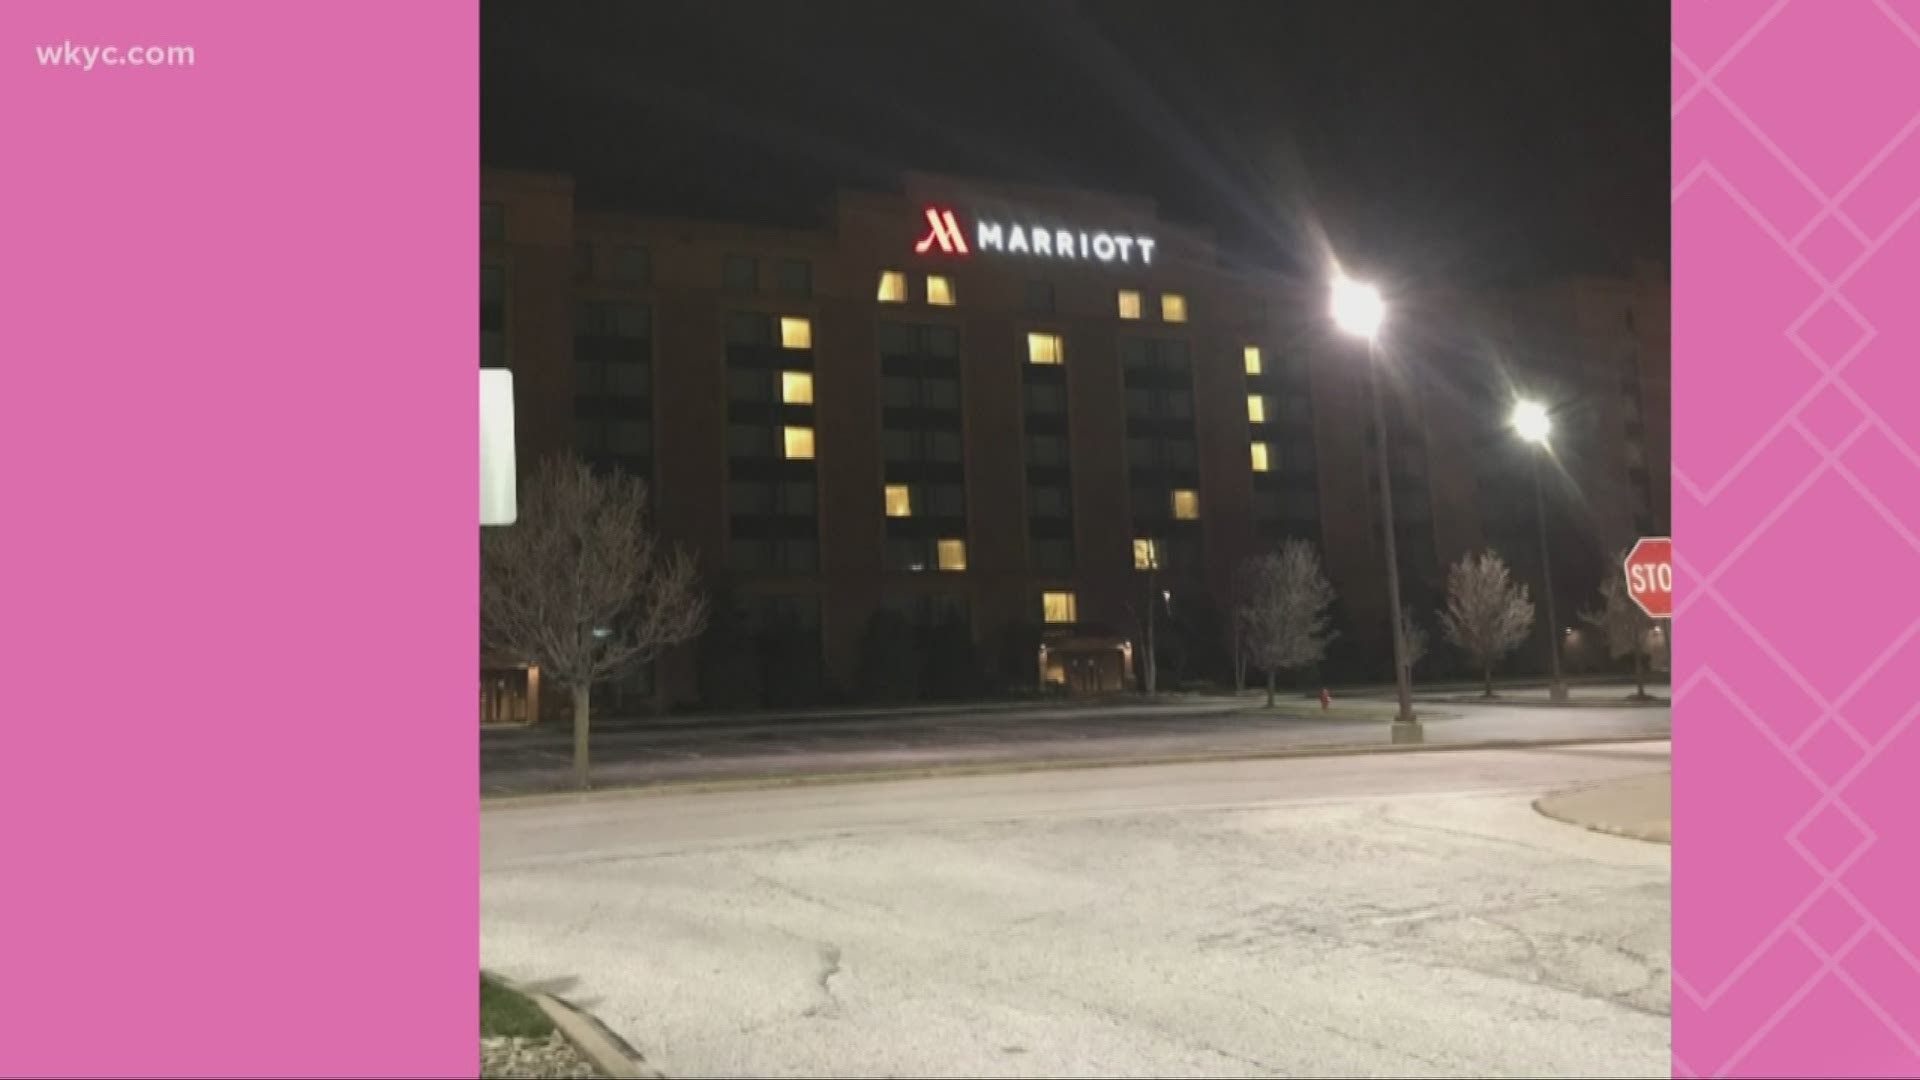 This is something we all need to see. Windows at a Marriott hotel in Warrensville Heights have been illuminated to create the shape of a heart to help spread hope.